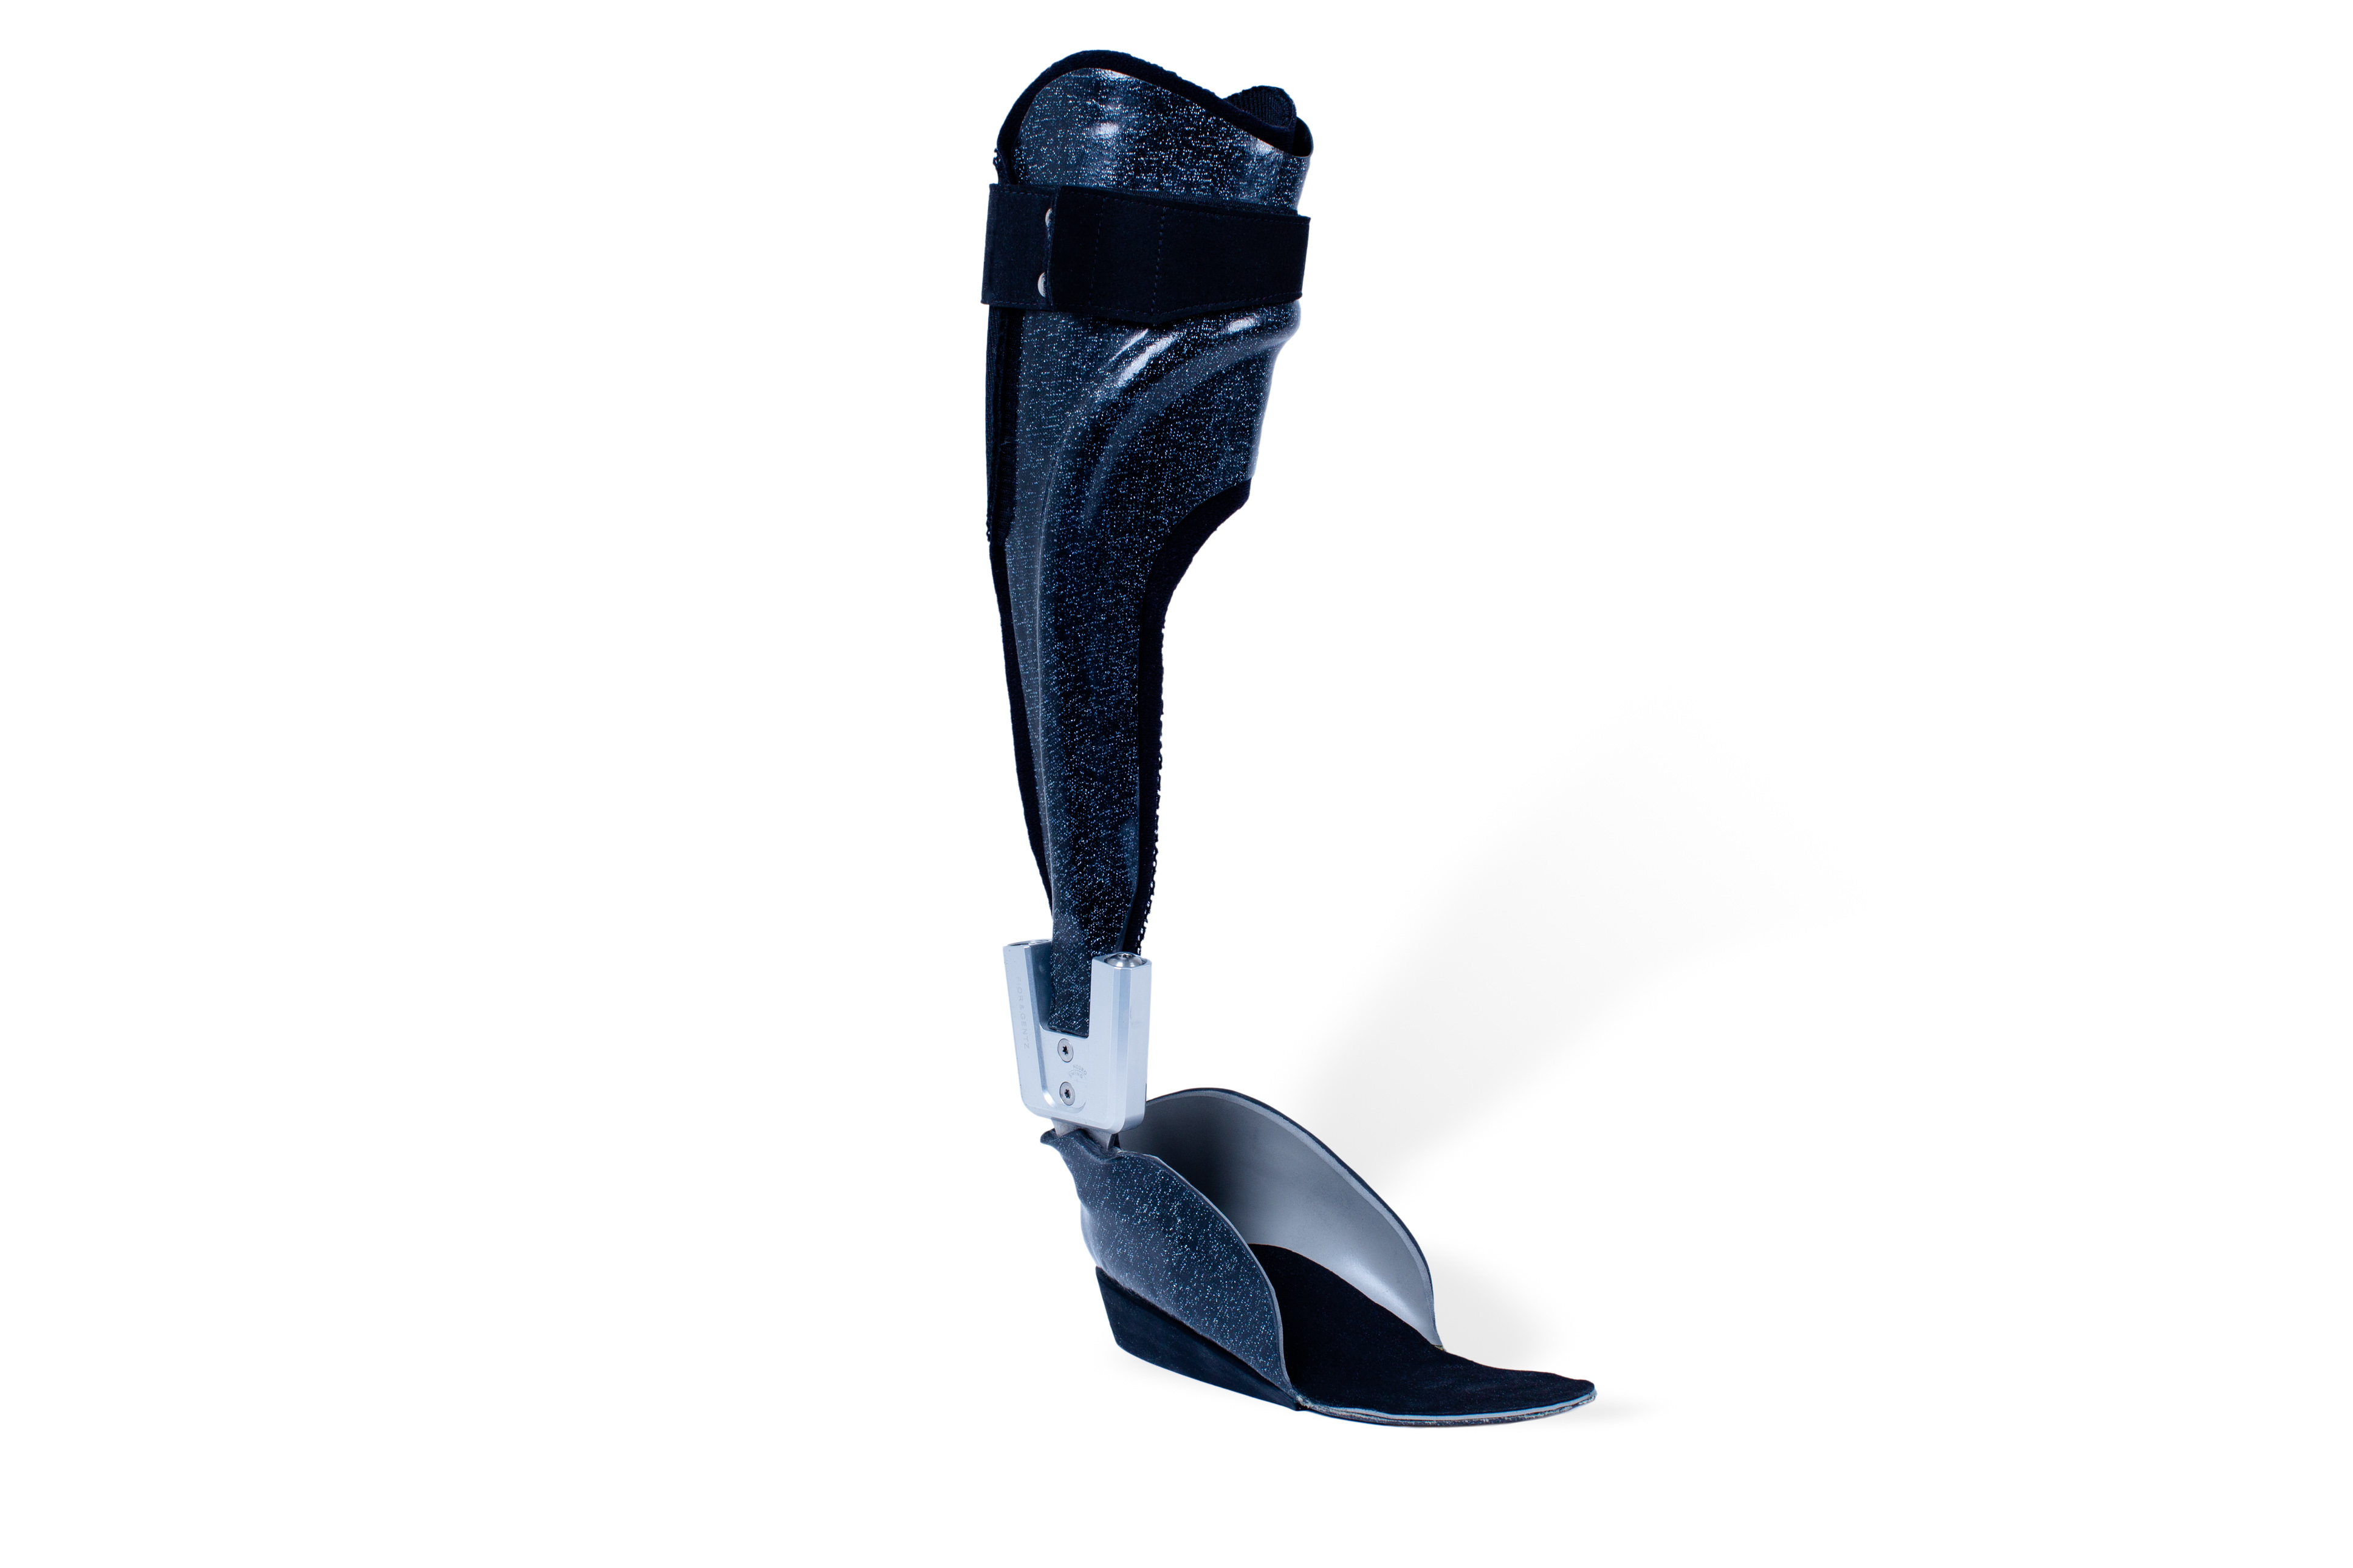 Neuro Swing Ankle Foot Orthosis made from carbon fibre